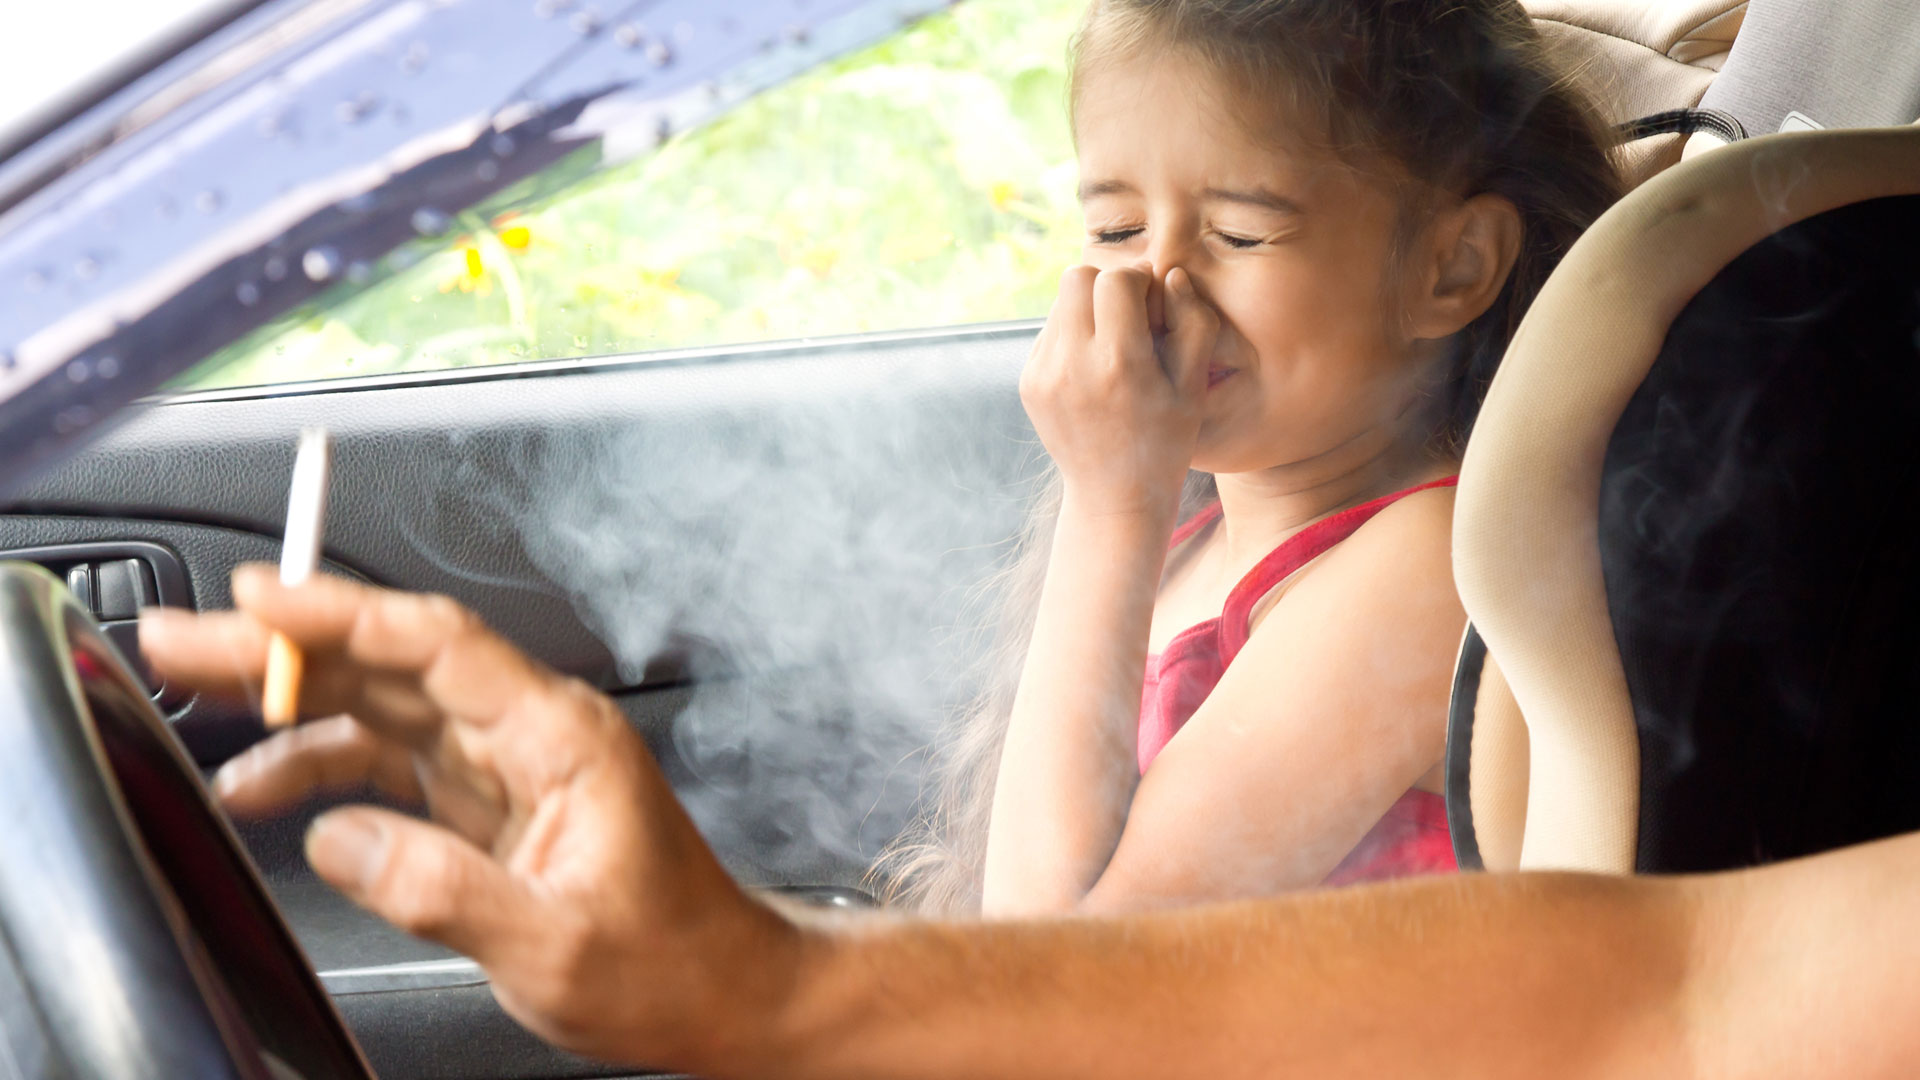 smoking in a car with a child